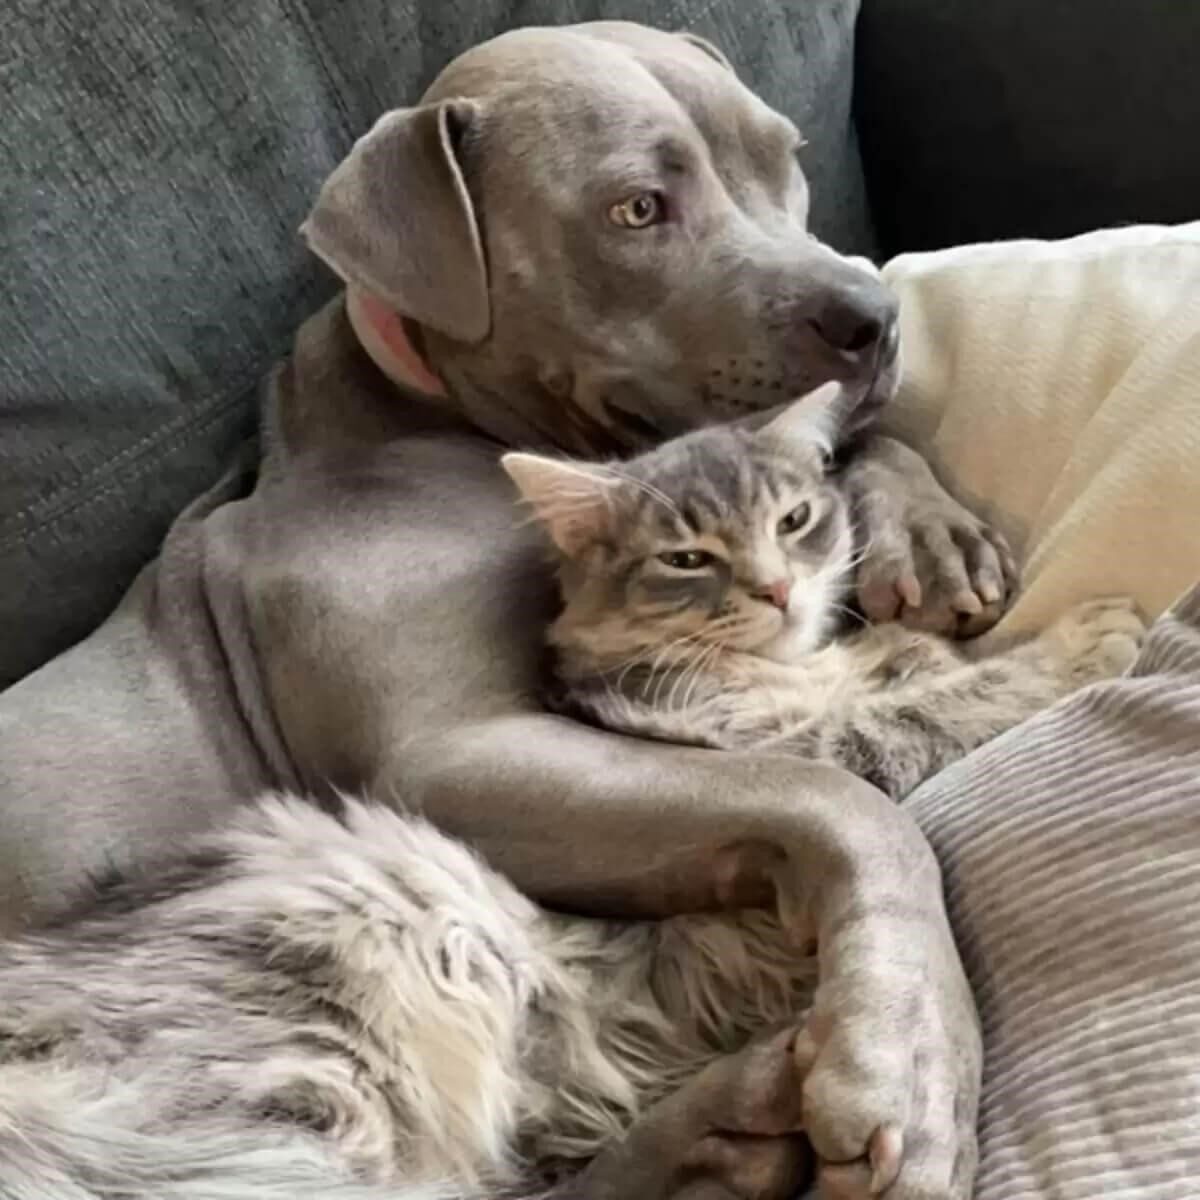 A Dog Who Raised with Cats Believes She is a Cat Too